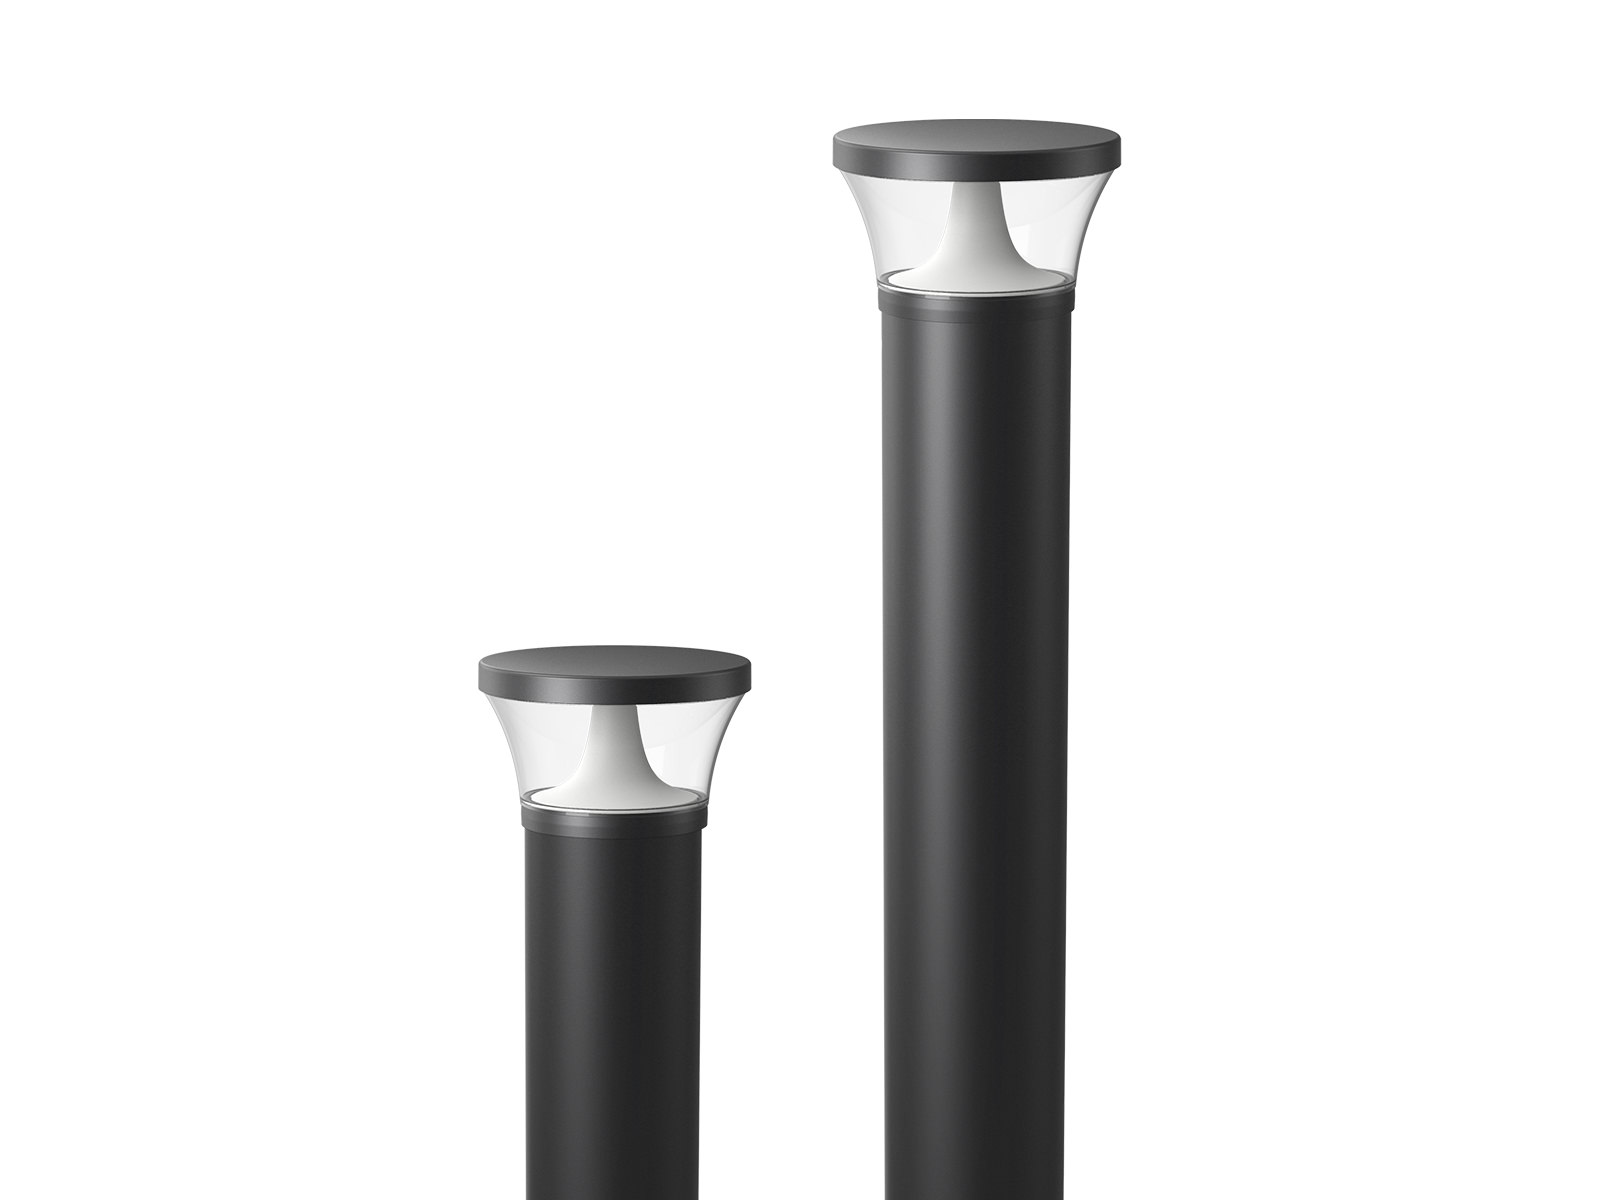 BL03 LED Bollard Light With 360° Coverage & Strong Anti-corrosion Performance